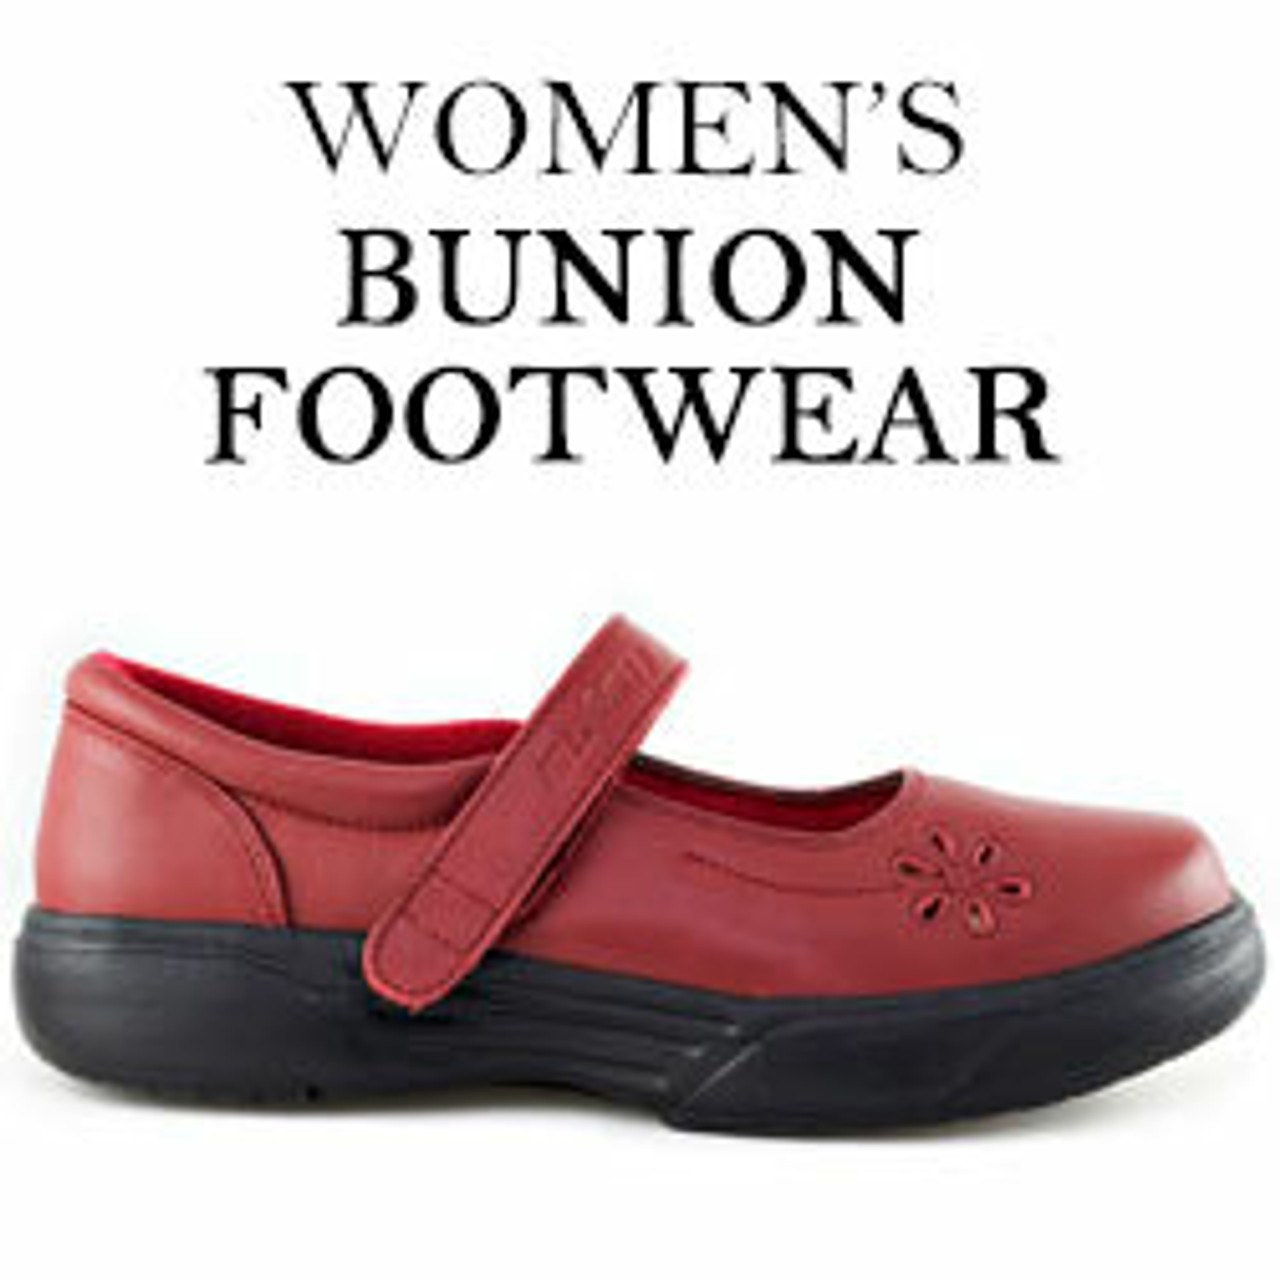 Shoes for Bunions